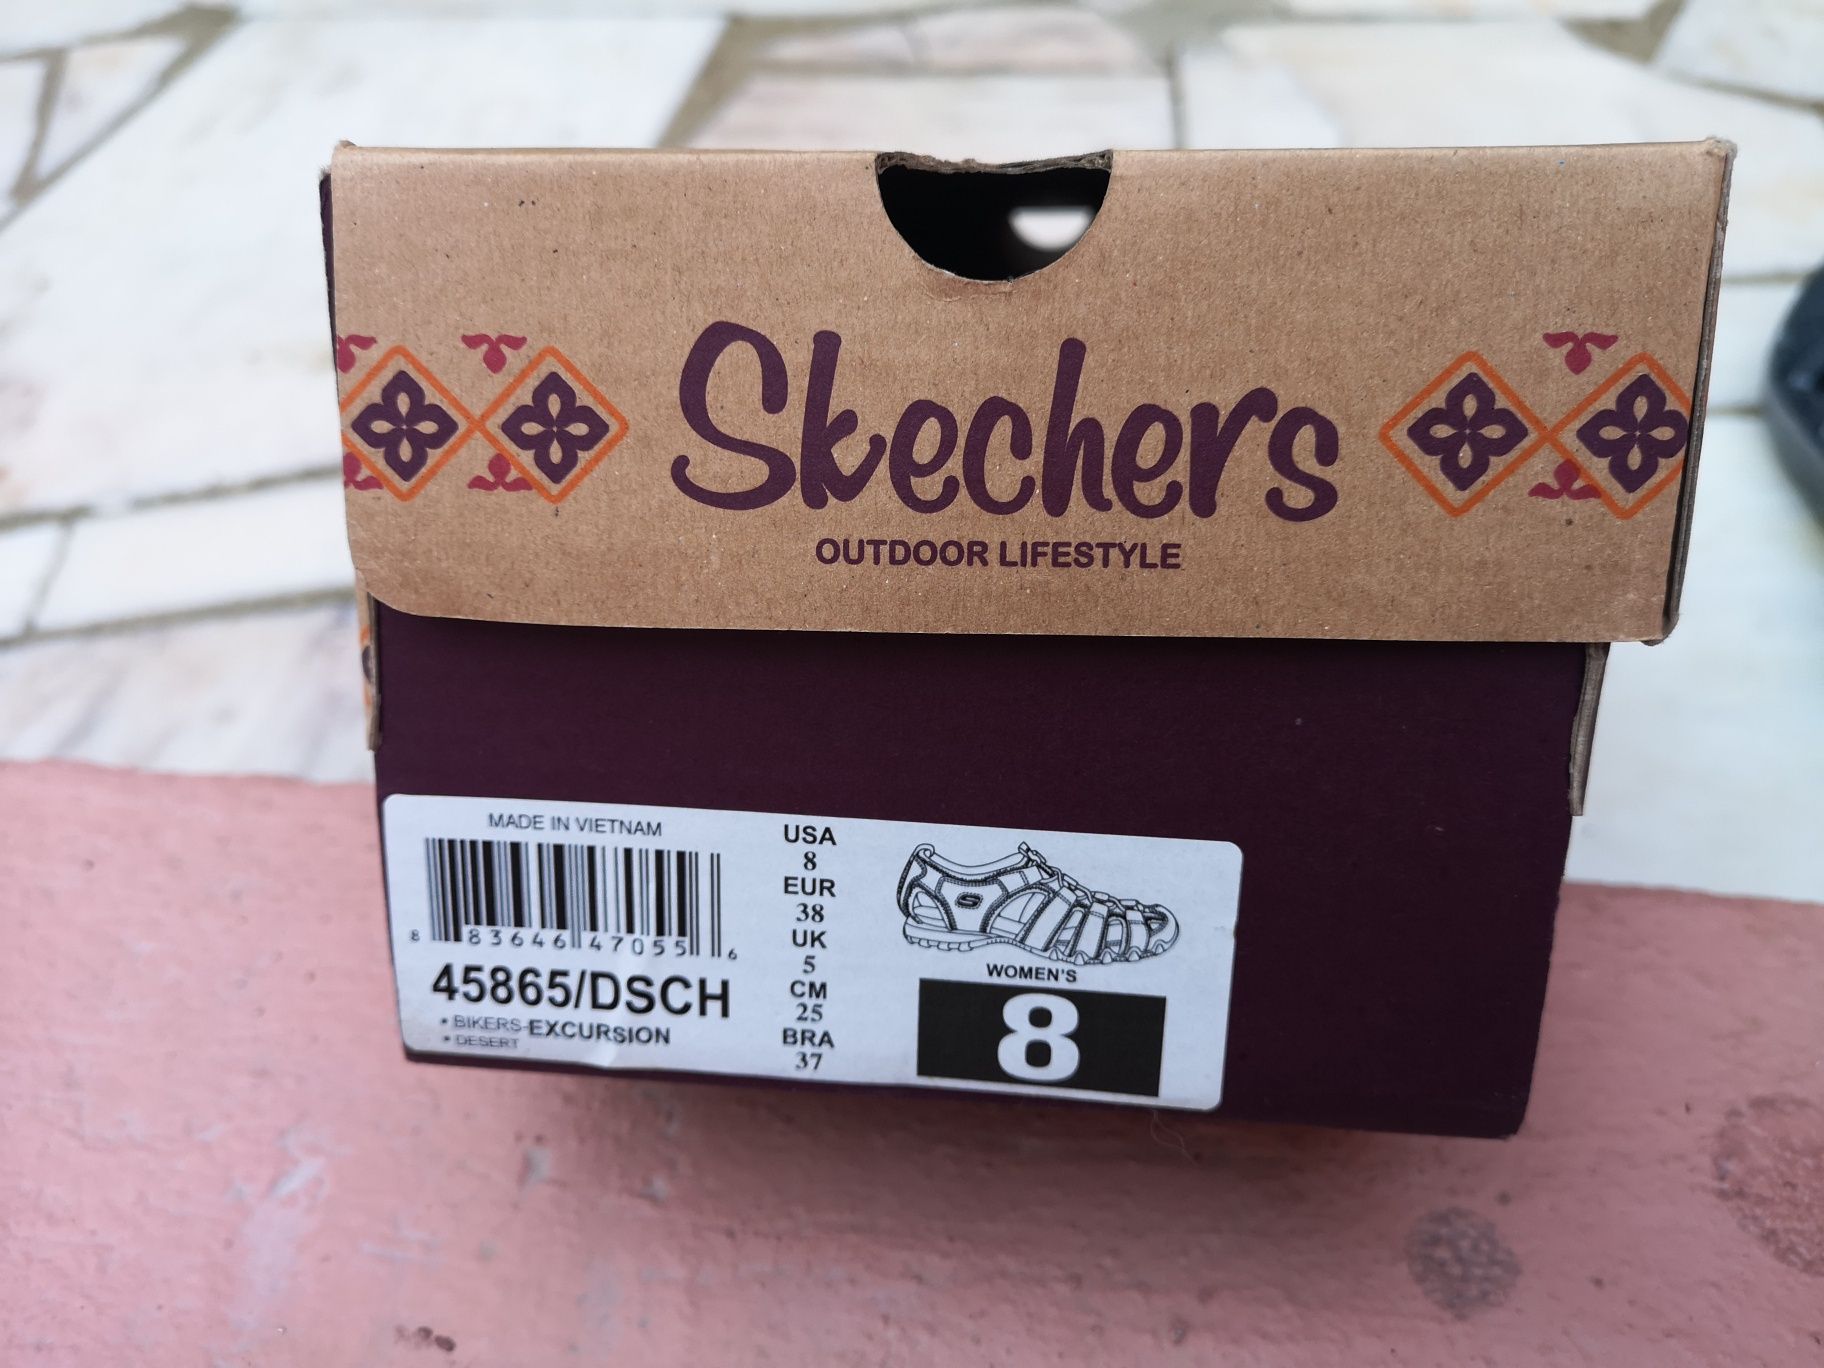 Sapatilhas Sketchers outdoor lifestyle 38